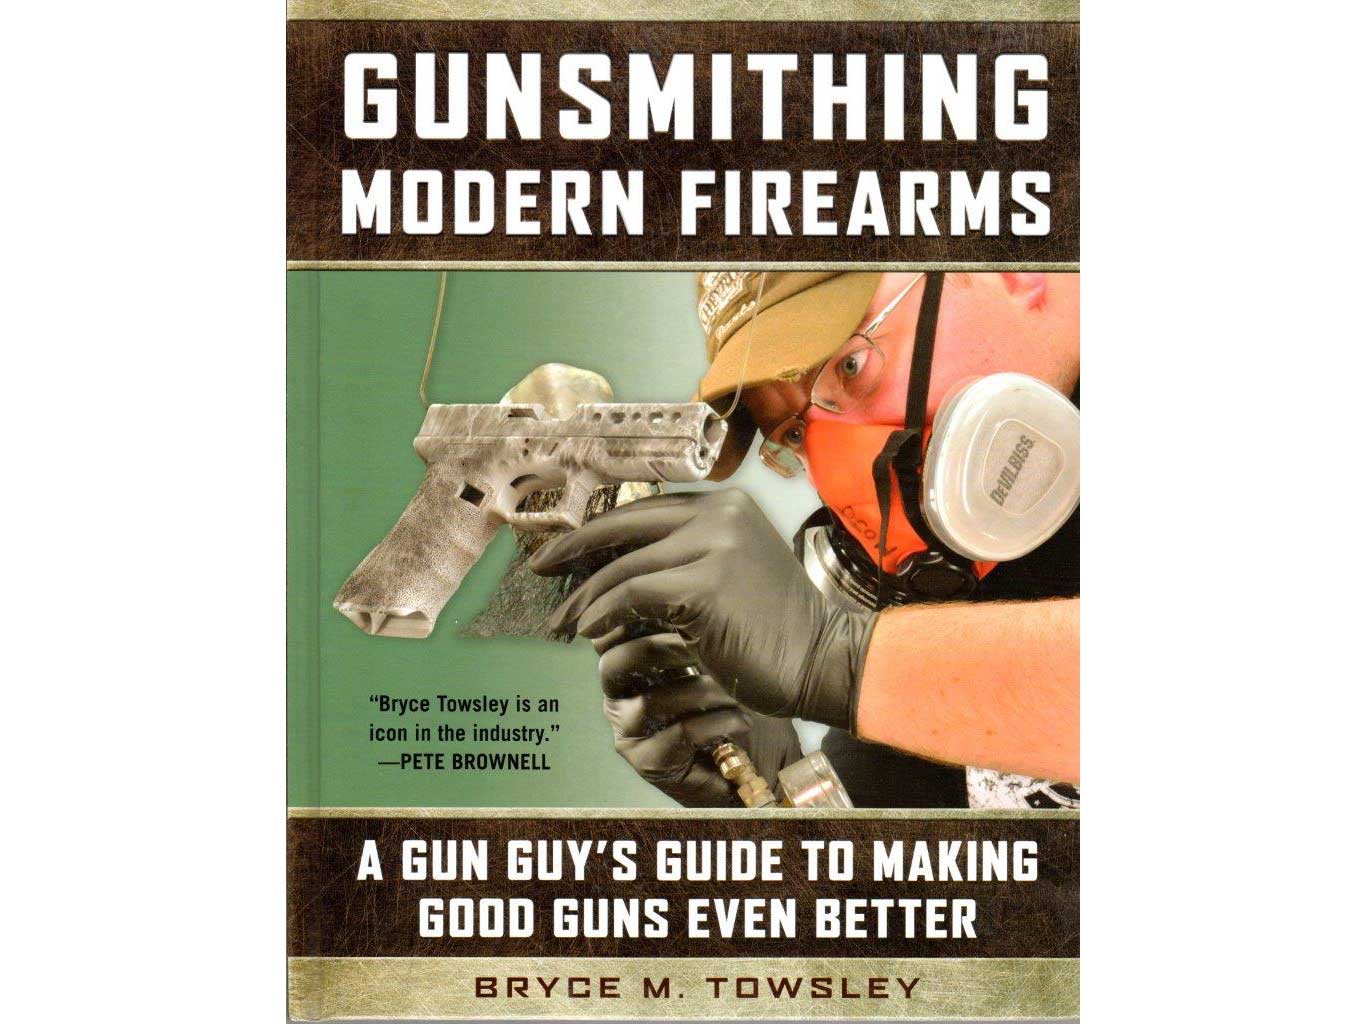 The book cover of Gunsmithing Modern Firearms.